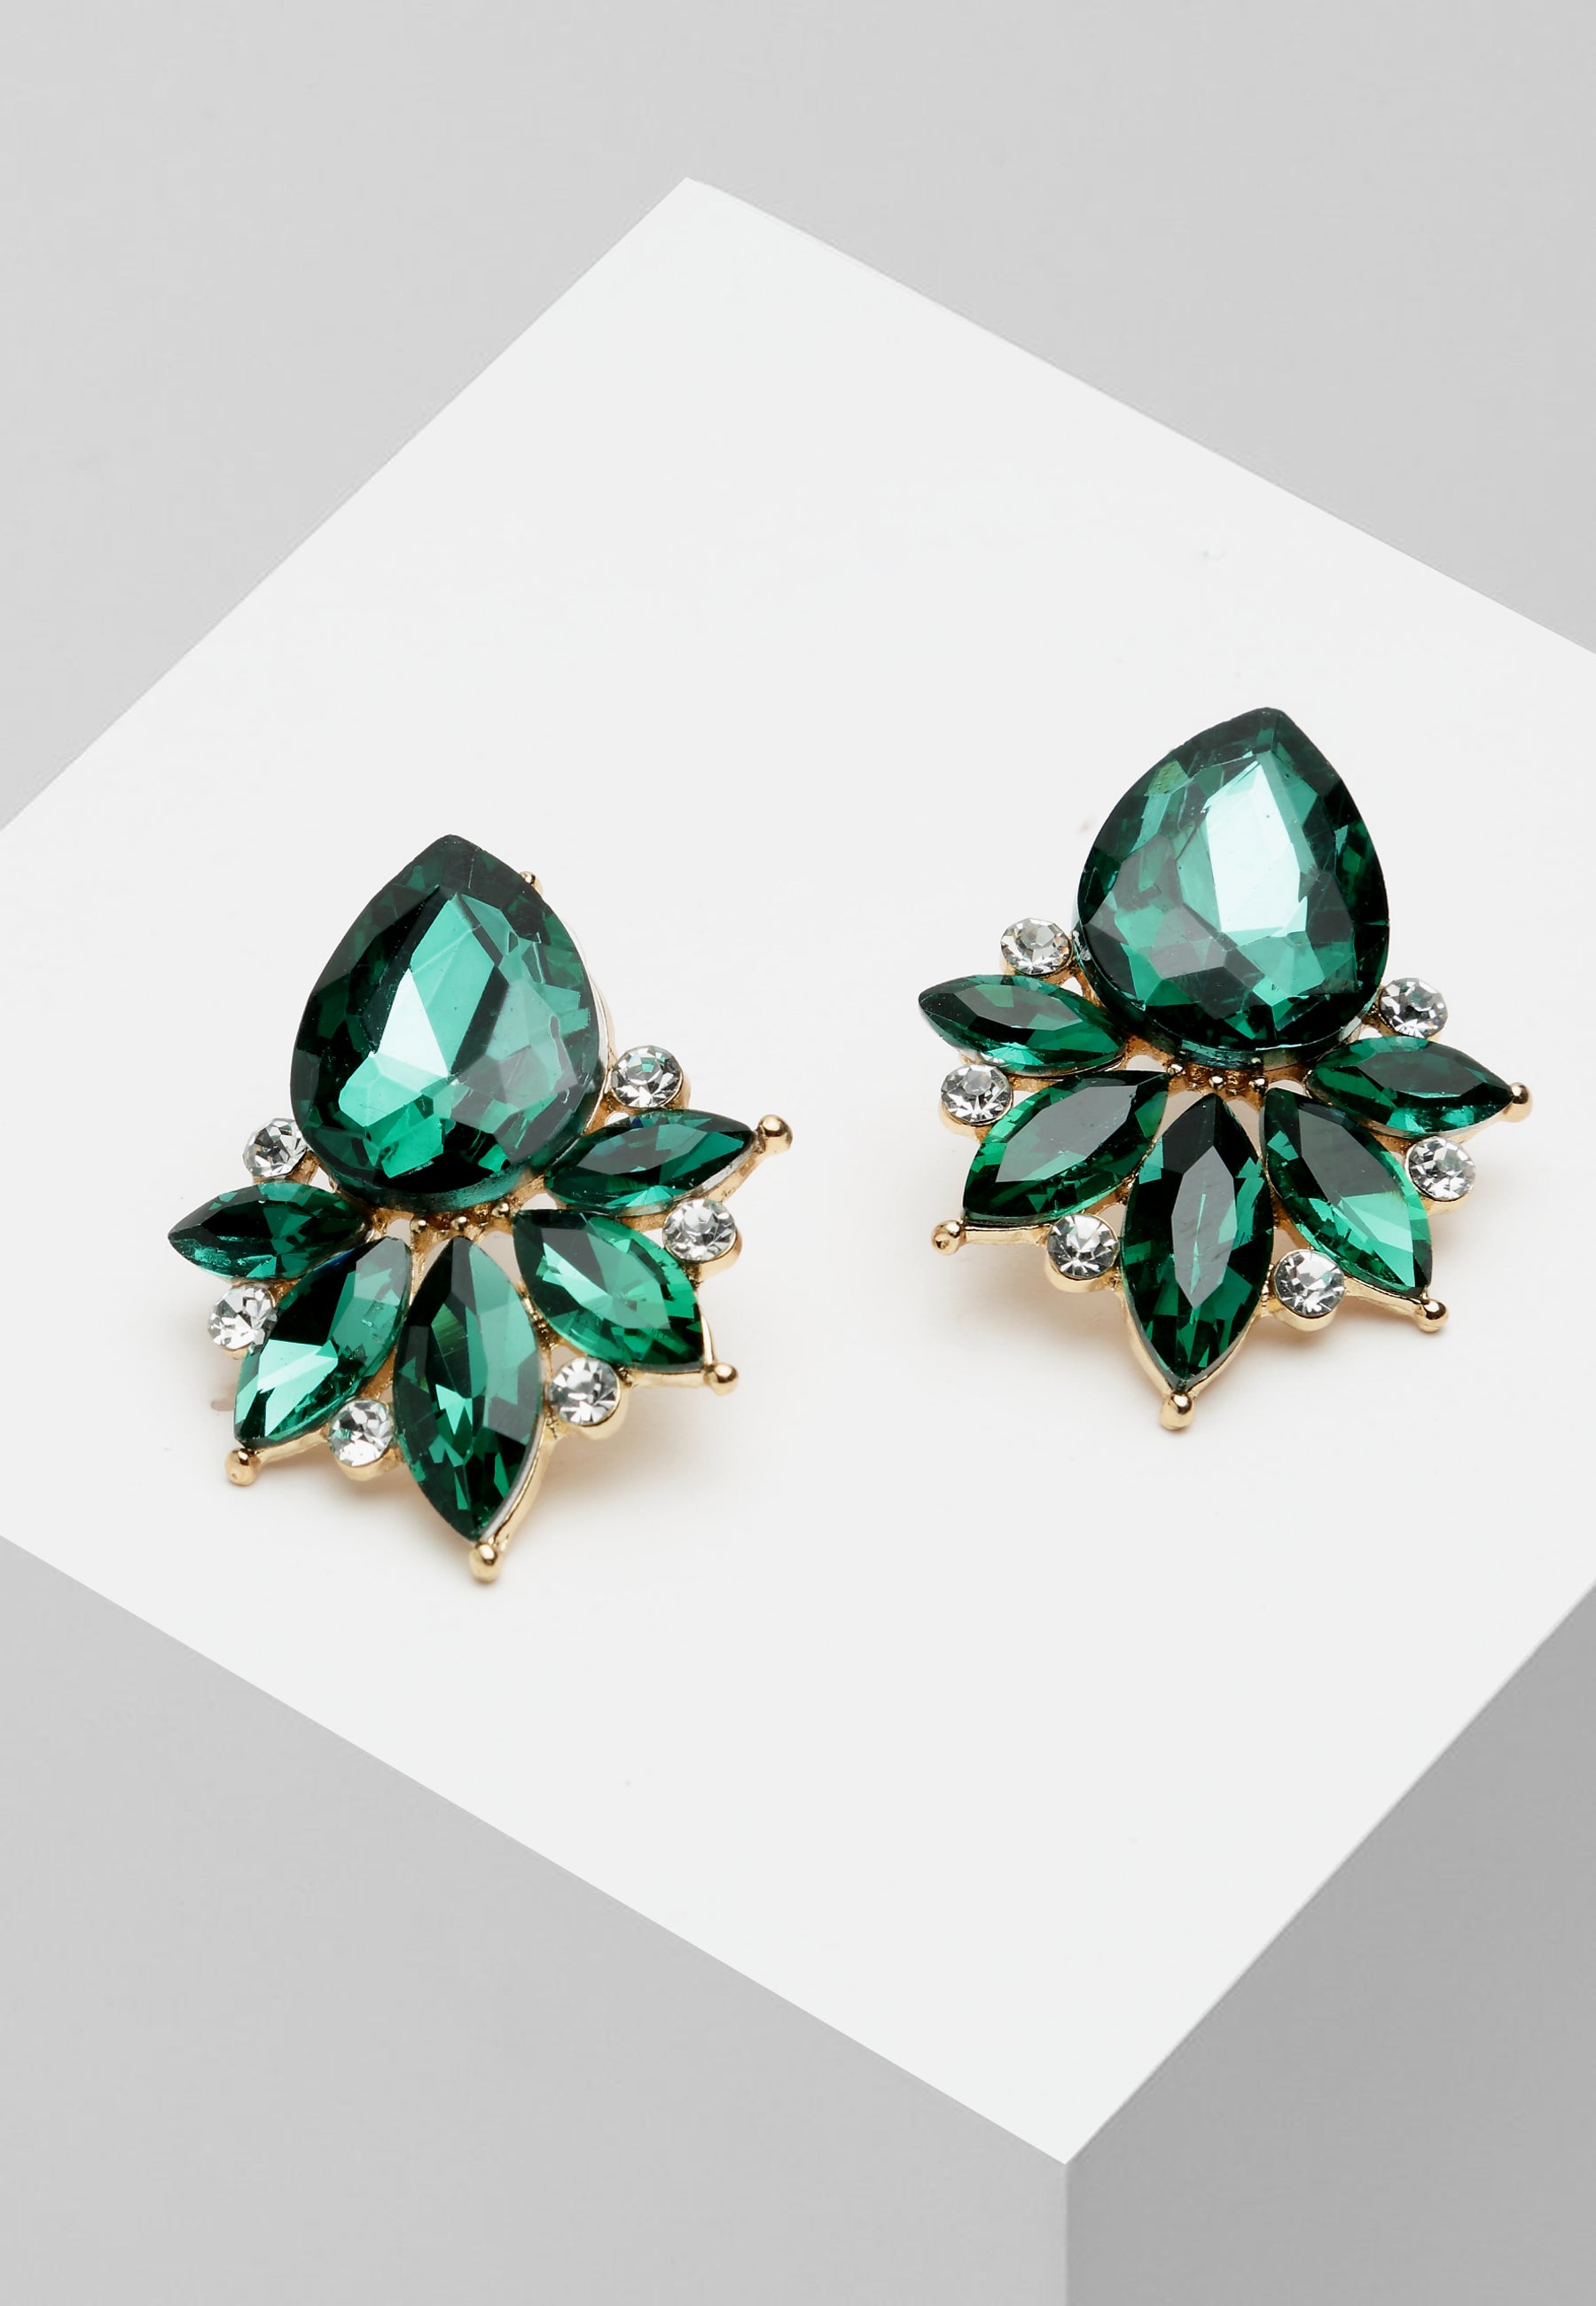 Crystal Studs in Green